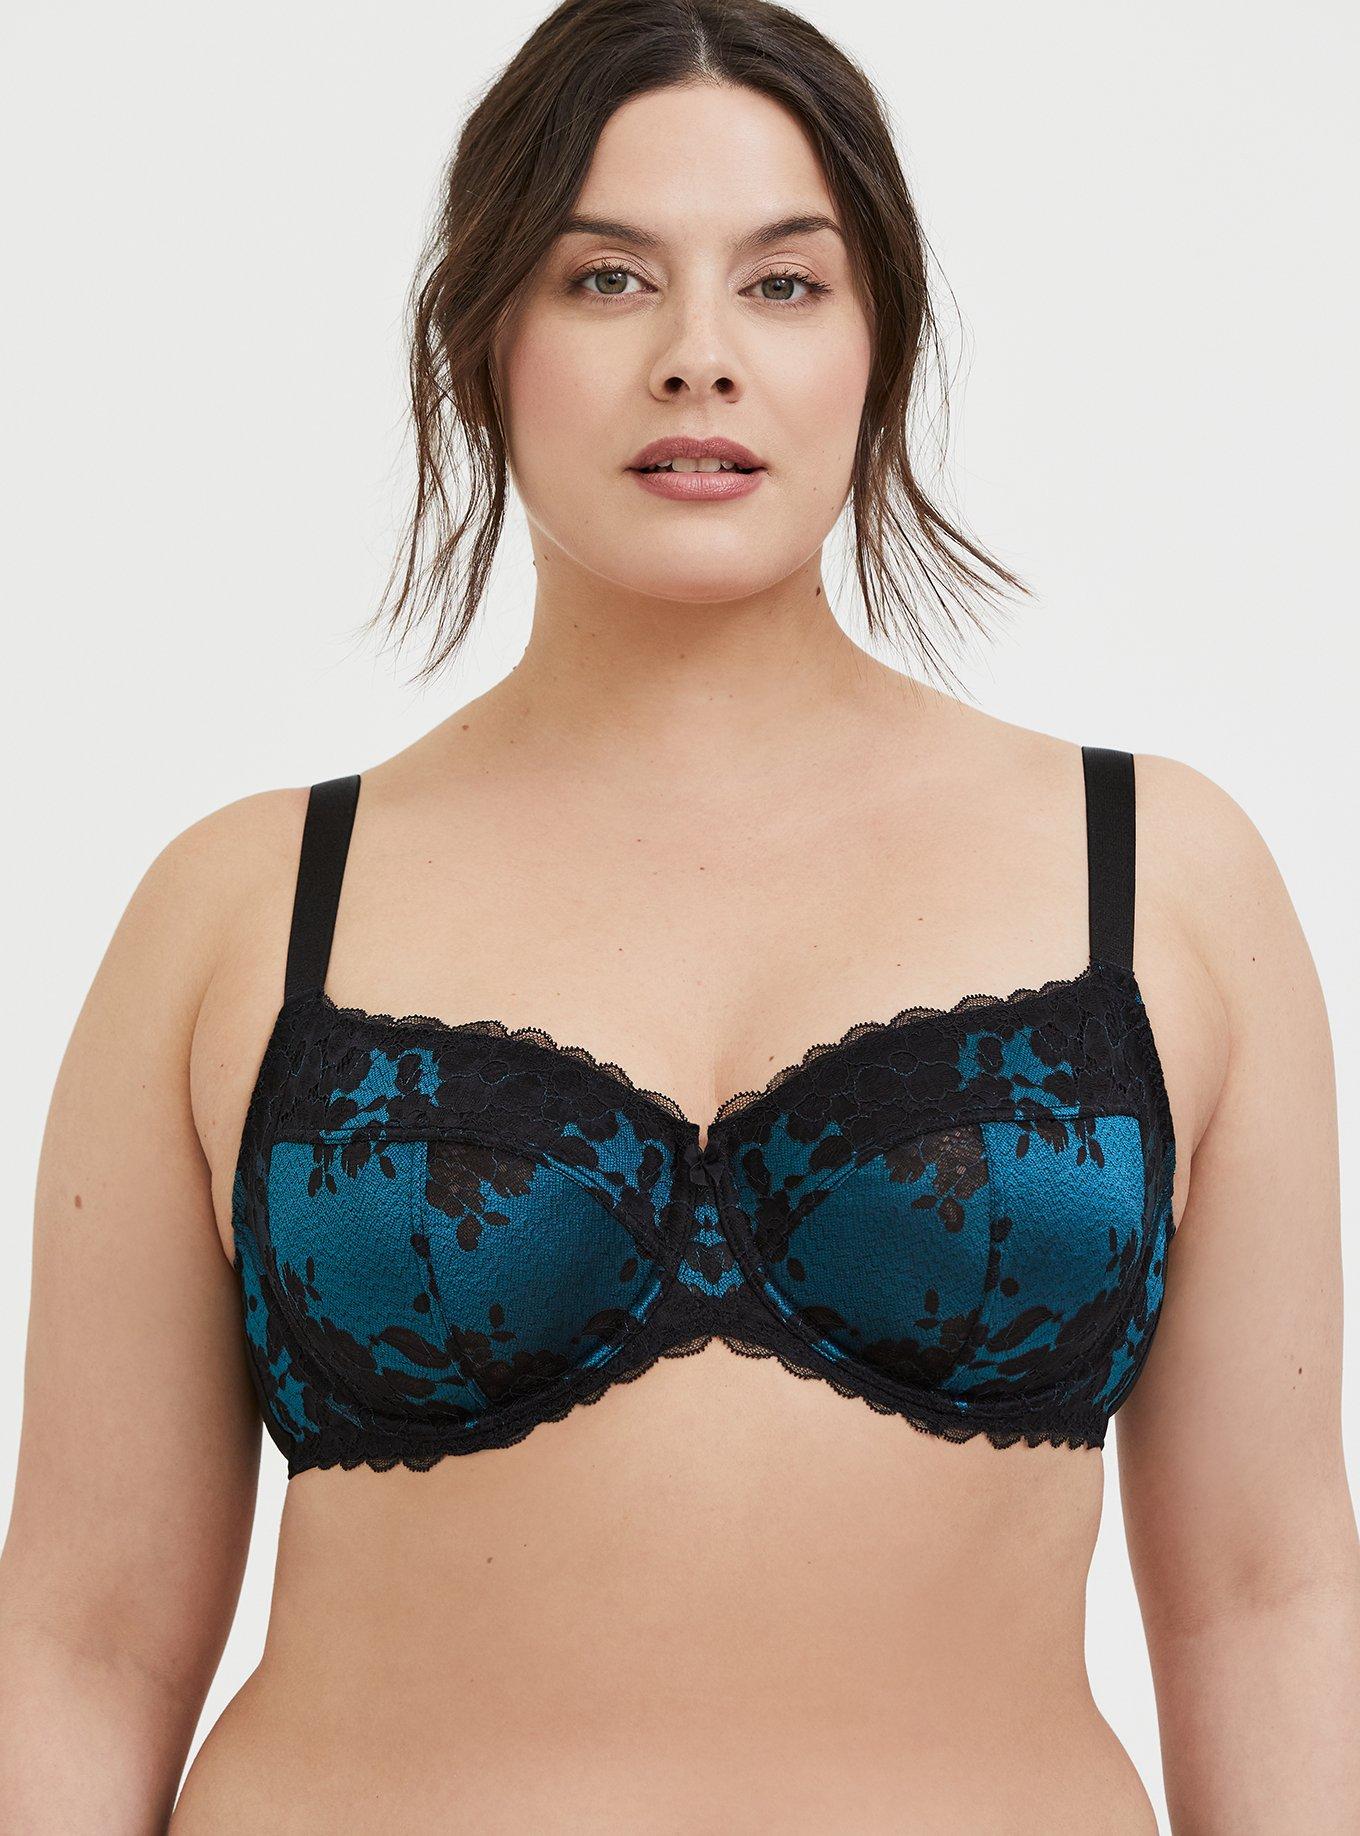 Plus Size - Full-Coverage Unlined Two Tone Lace Ballet Back Bra - Torrid